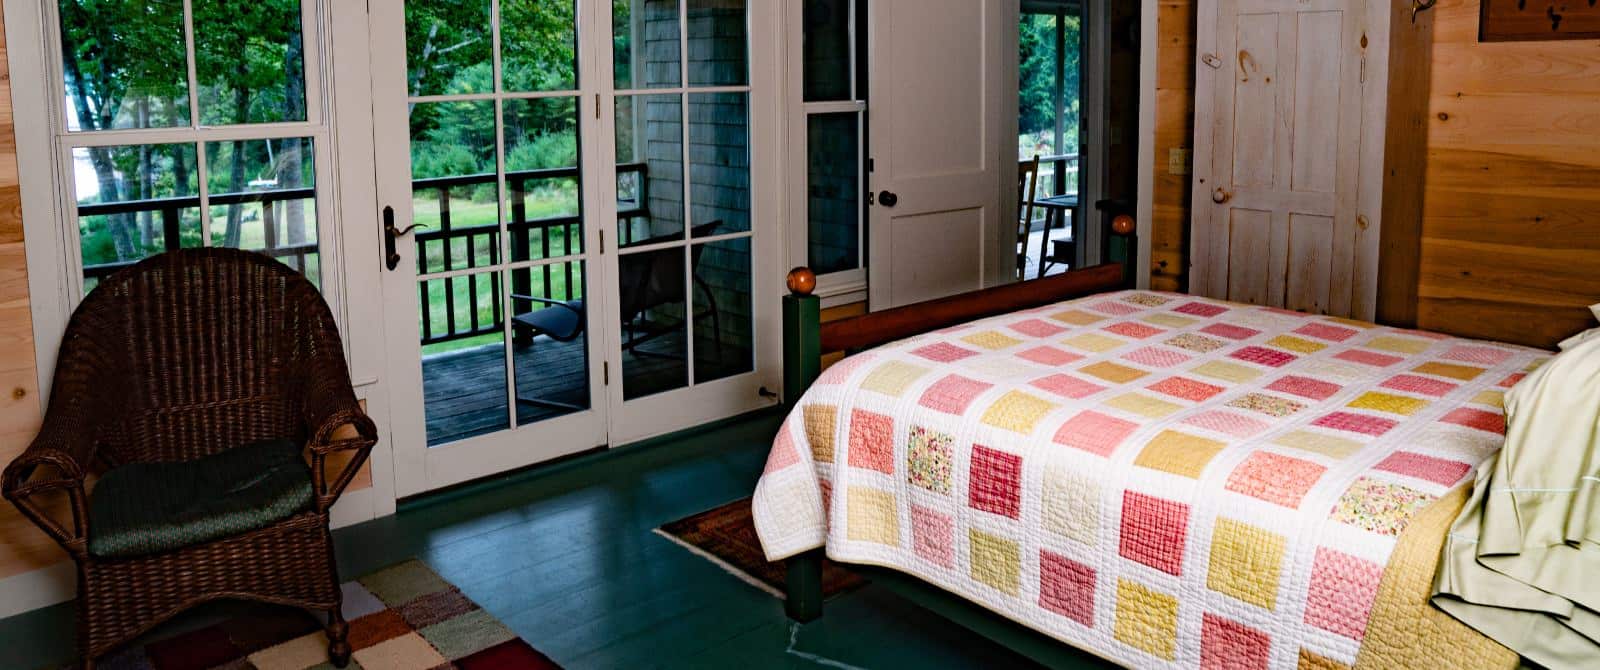 Bedroom with patio doors, green wooden floor, wicker chair and a bed made up in a white, yellow and pink quilt.